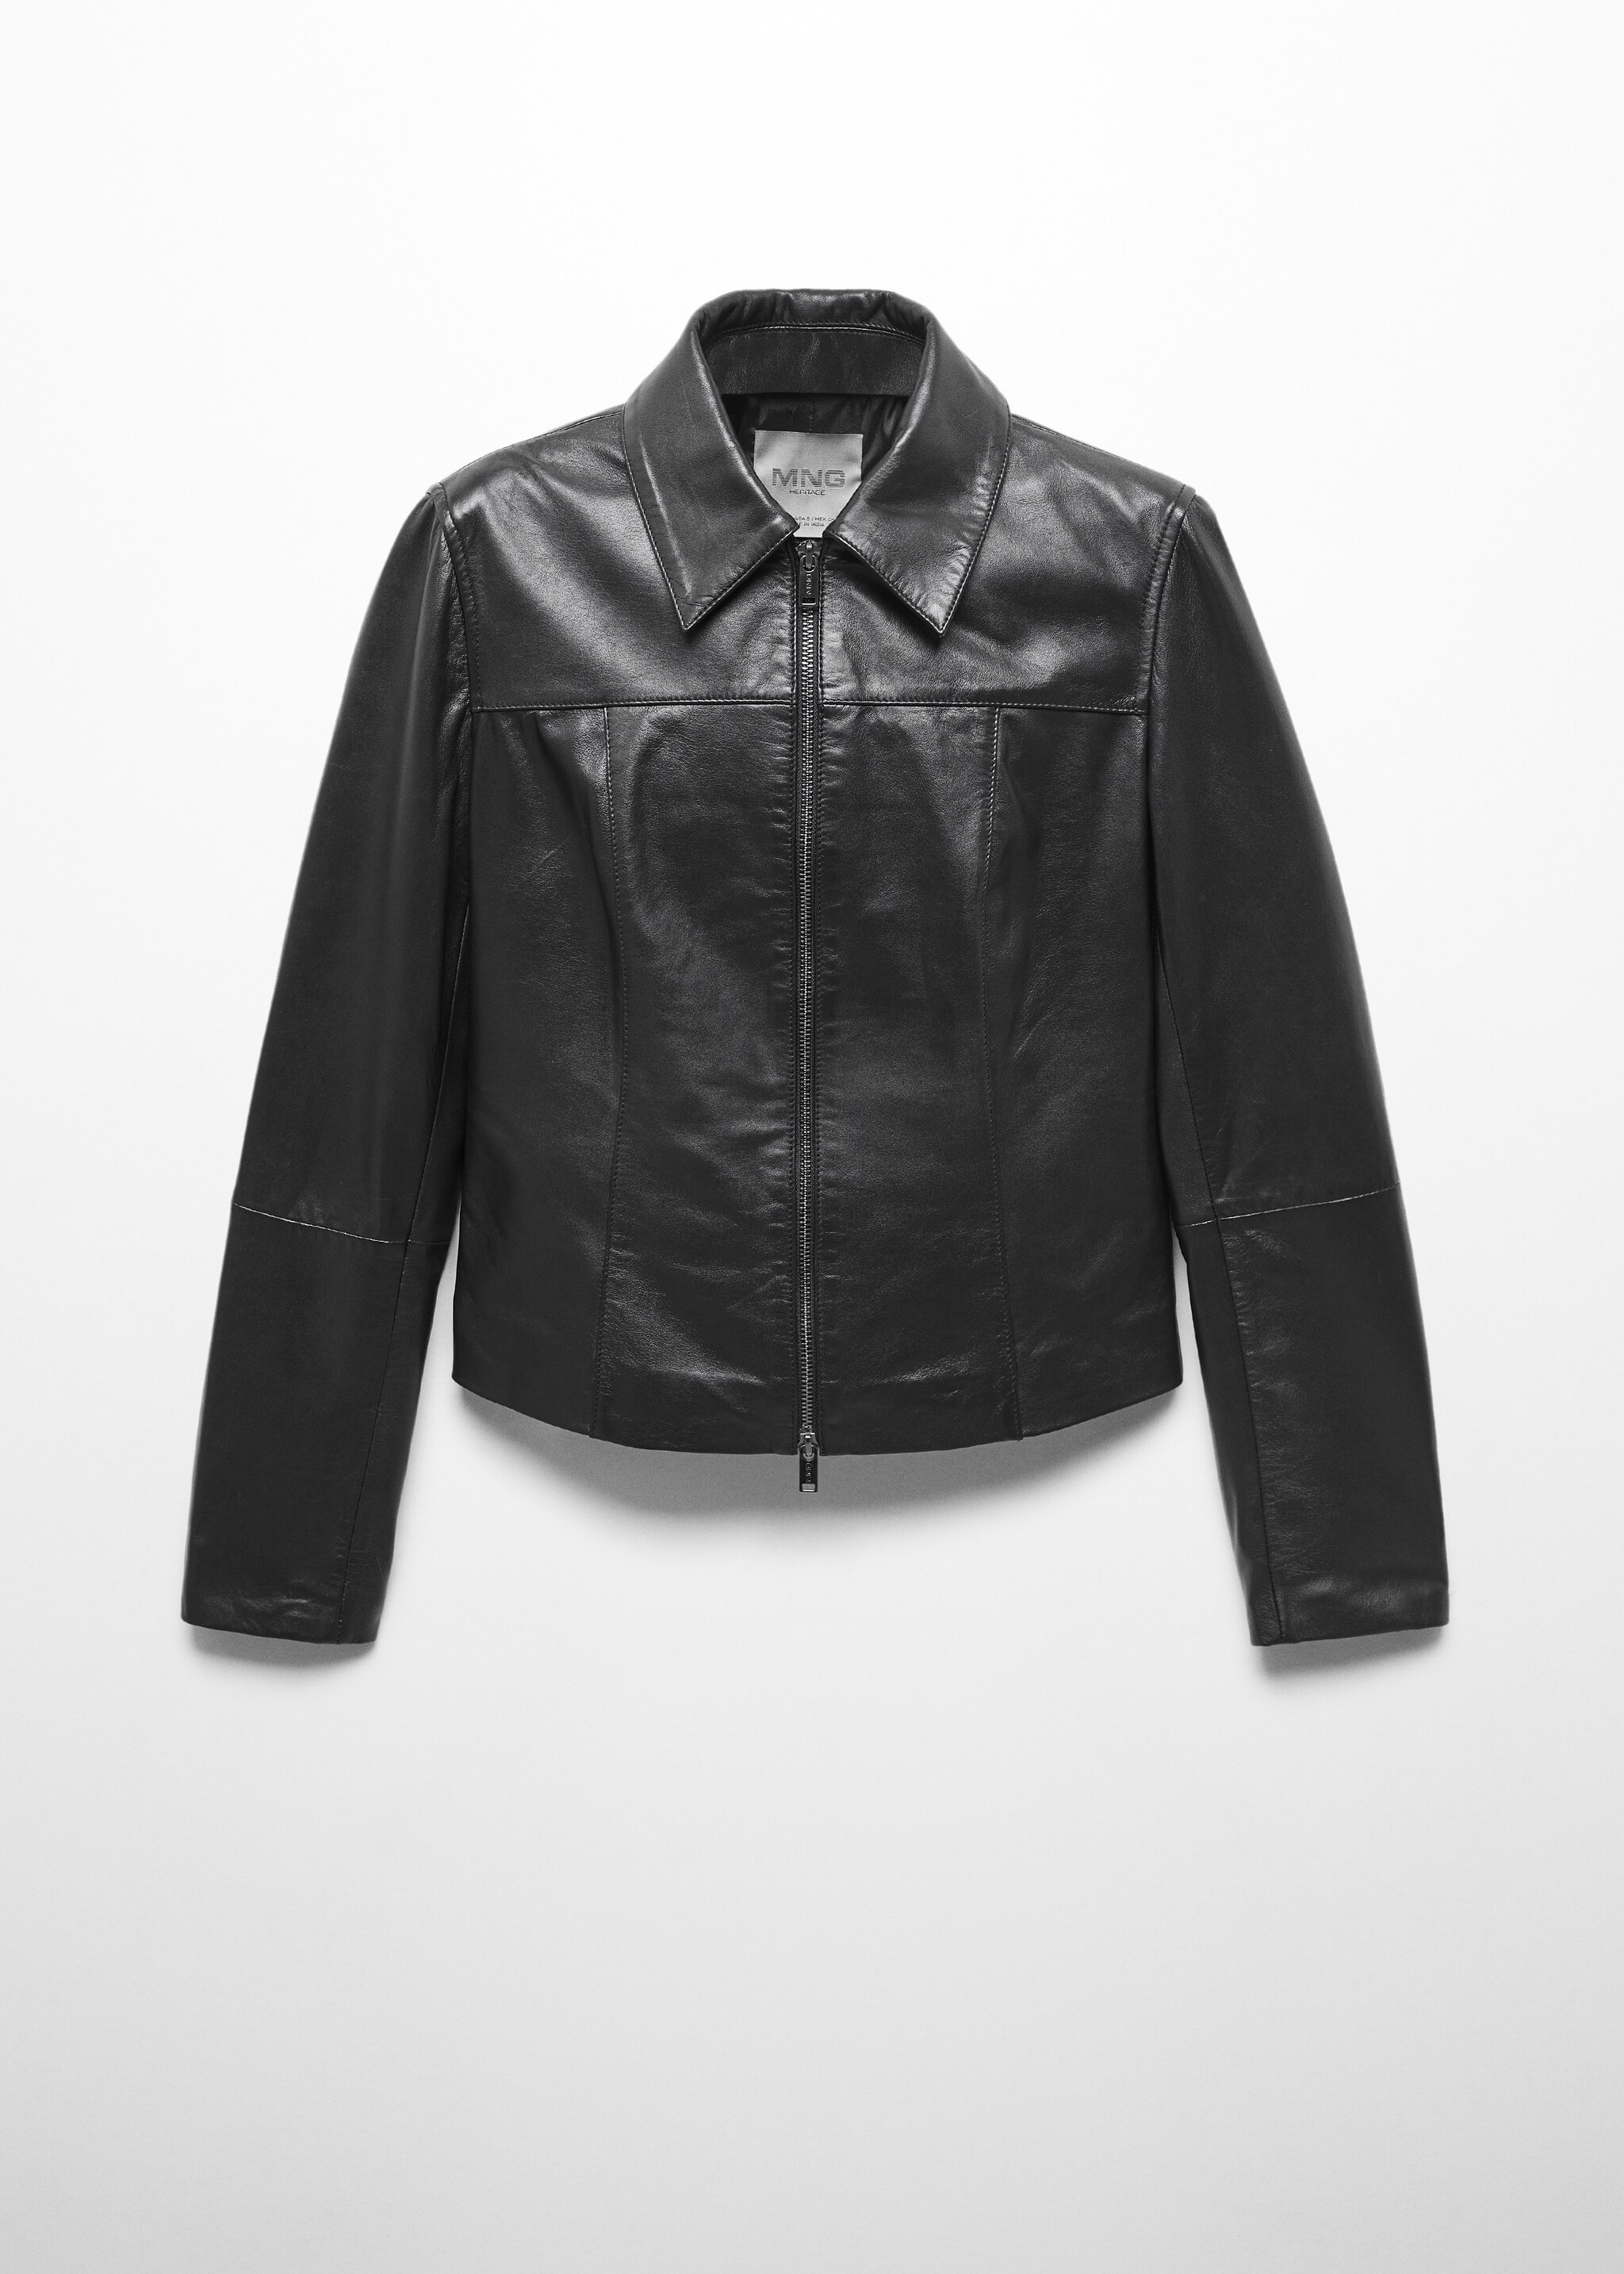 100% leather fitted jacket - Article without model